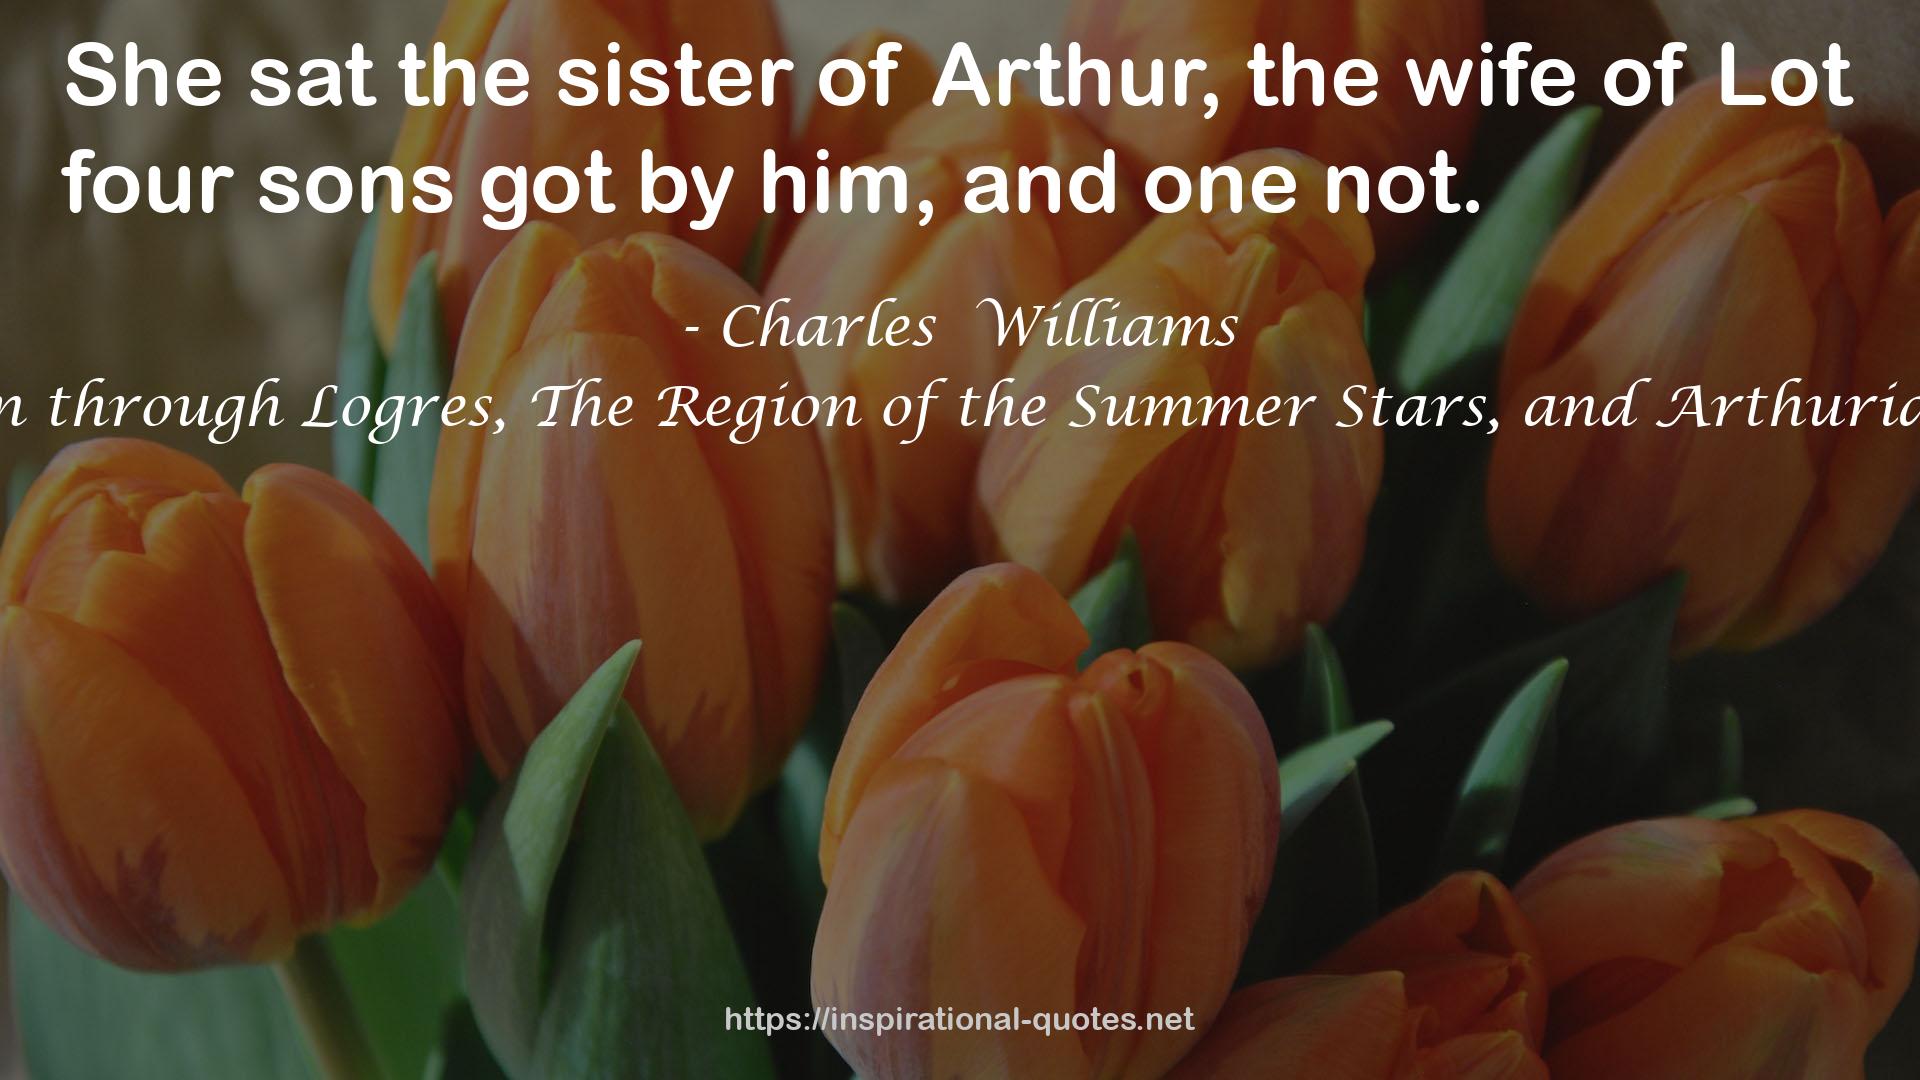 Taliessin through Logres, The Region of the Summer Stars, and Arthurian Torso QUOTES